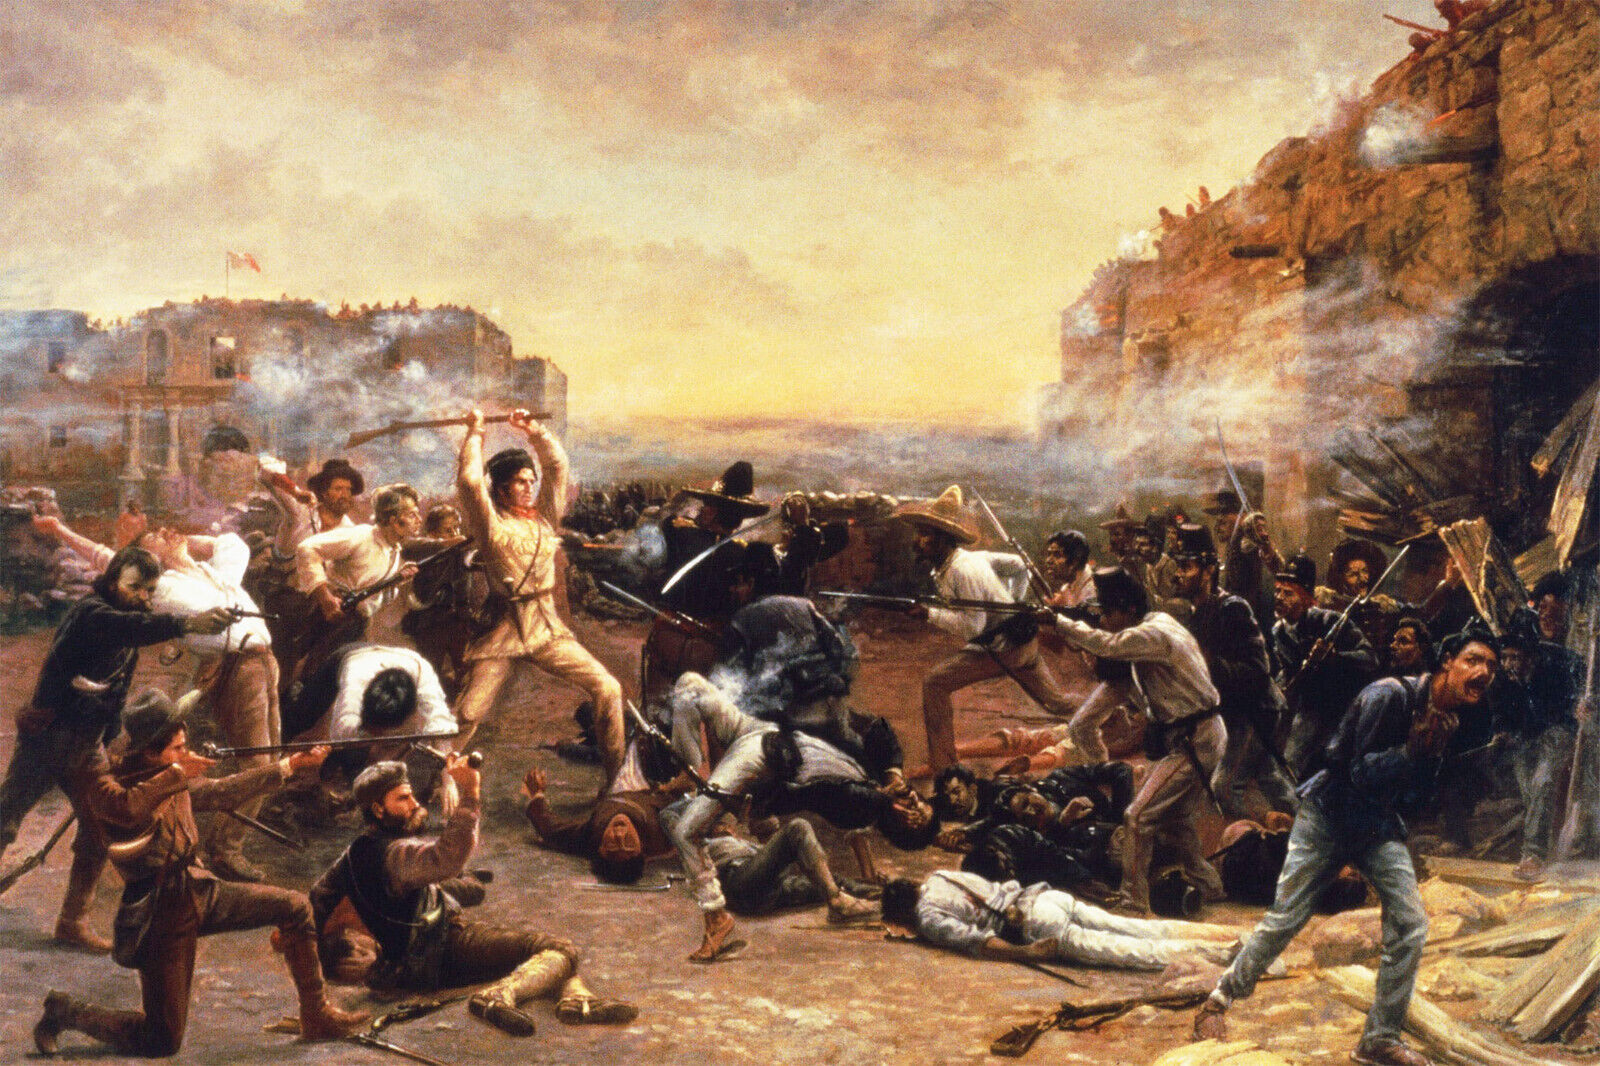 Poster, Many Sizes; The Fall of the Alamo depicts Davy Crockett swinging his rif